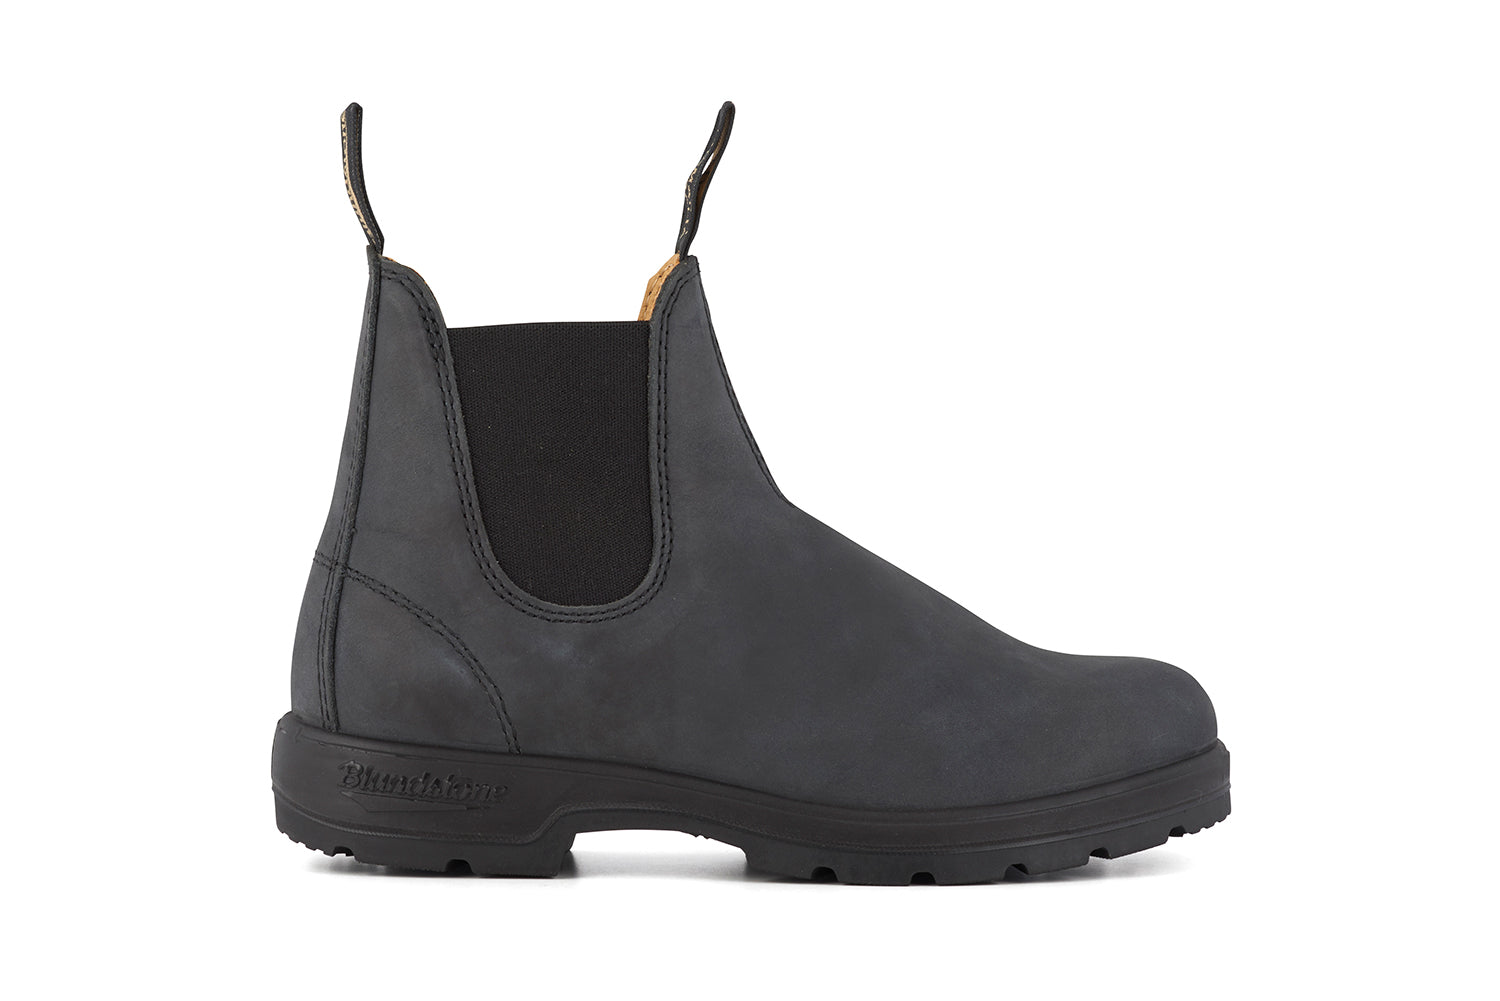 Blundstone #587 Classics Unisex Rustic Black Leather Water Resistant Pull On Ankle Boots